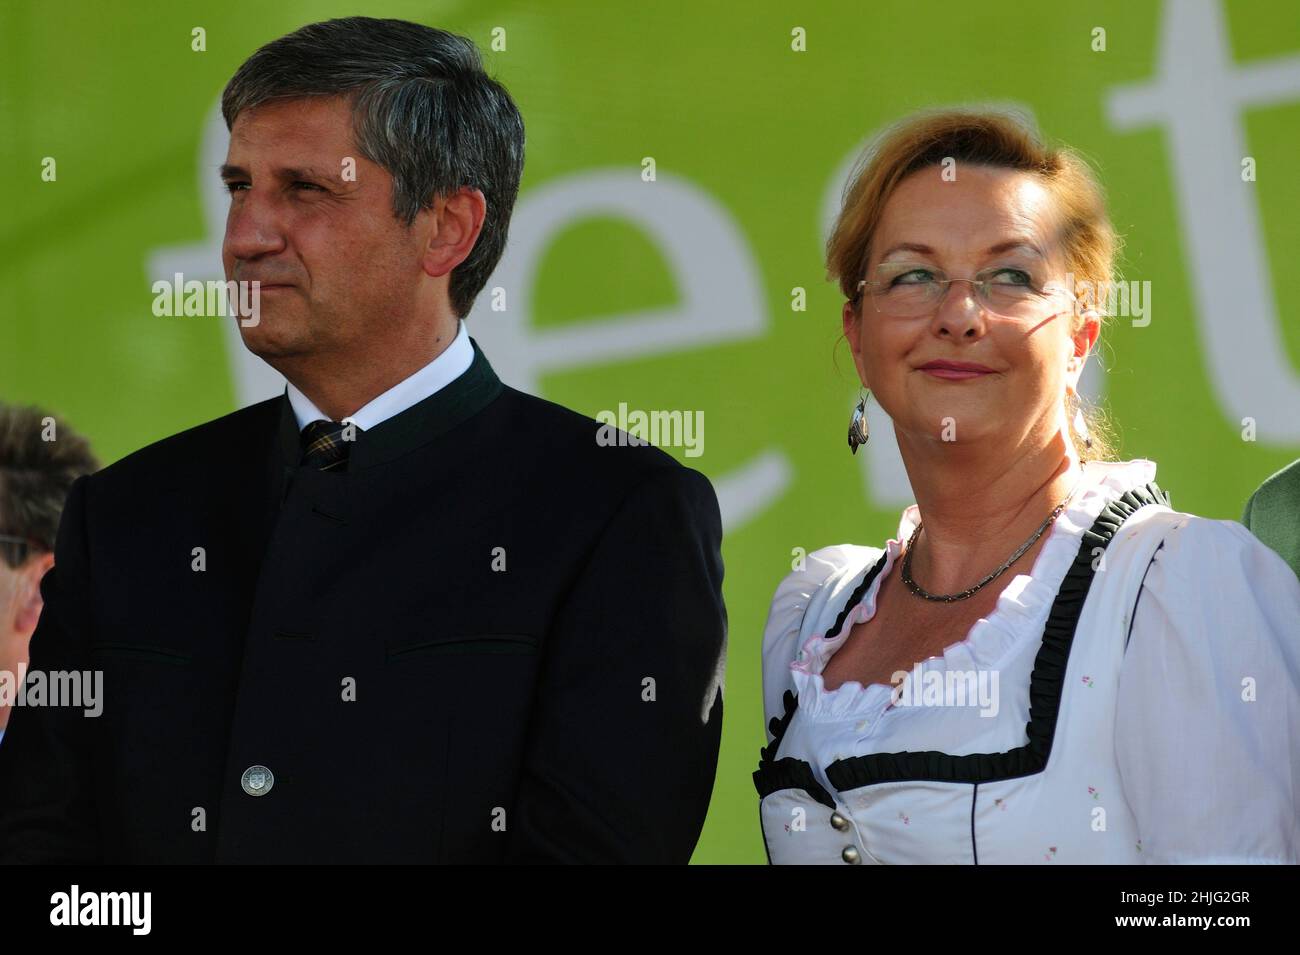 Vienna, Austria. September 09, 2012. Harvest Festival 2012 in Vienna at Heldenplatz. Michael Spindelegger (L) Vice Chancellor from 2011-2013 and Maria Fekter (R) Finance Minister from 2011-2013 Stock Photo